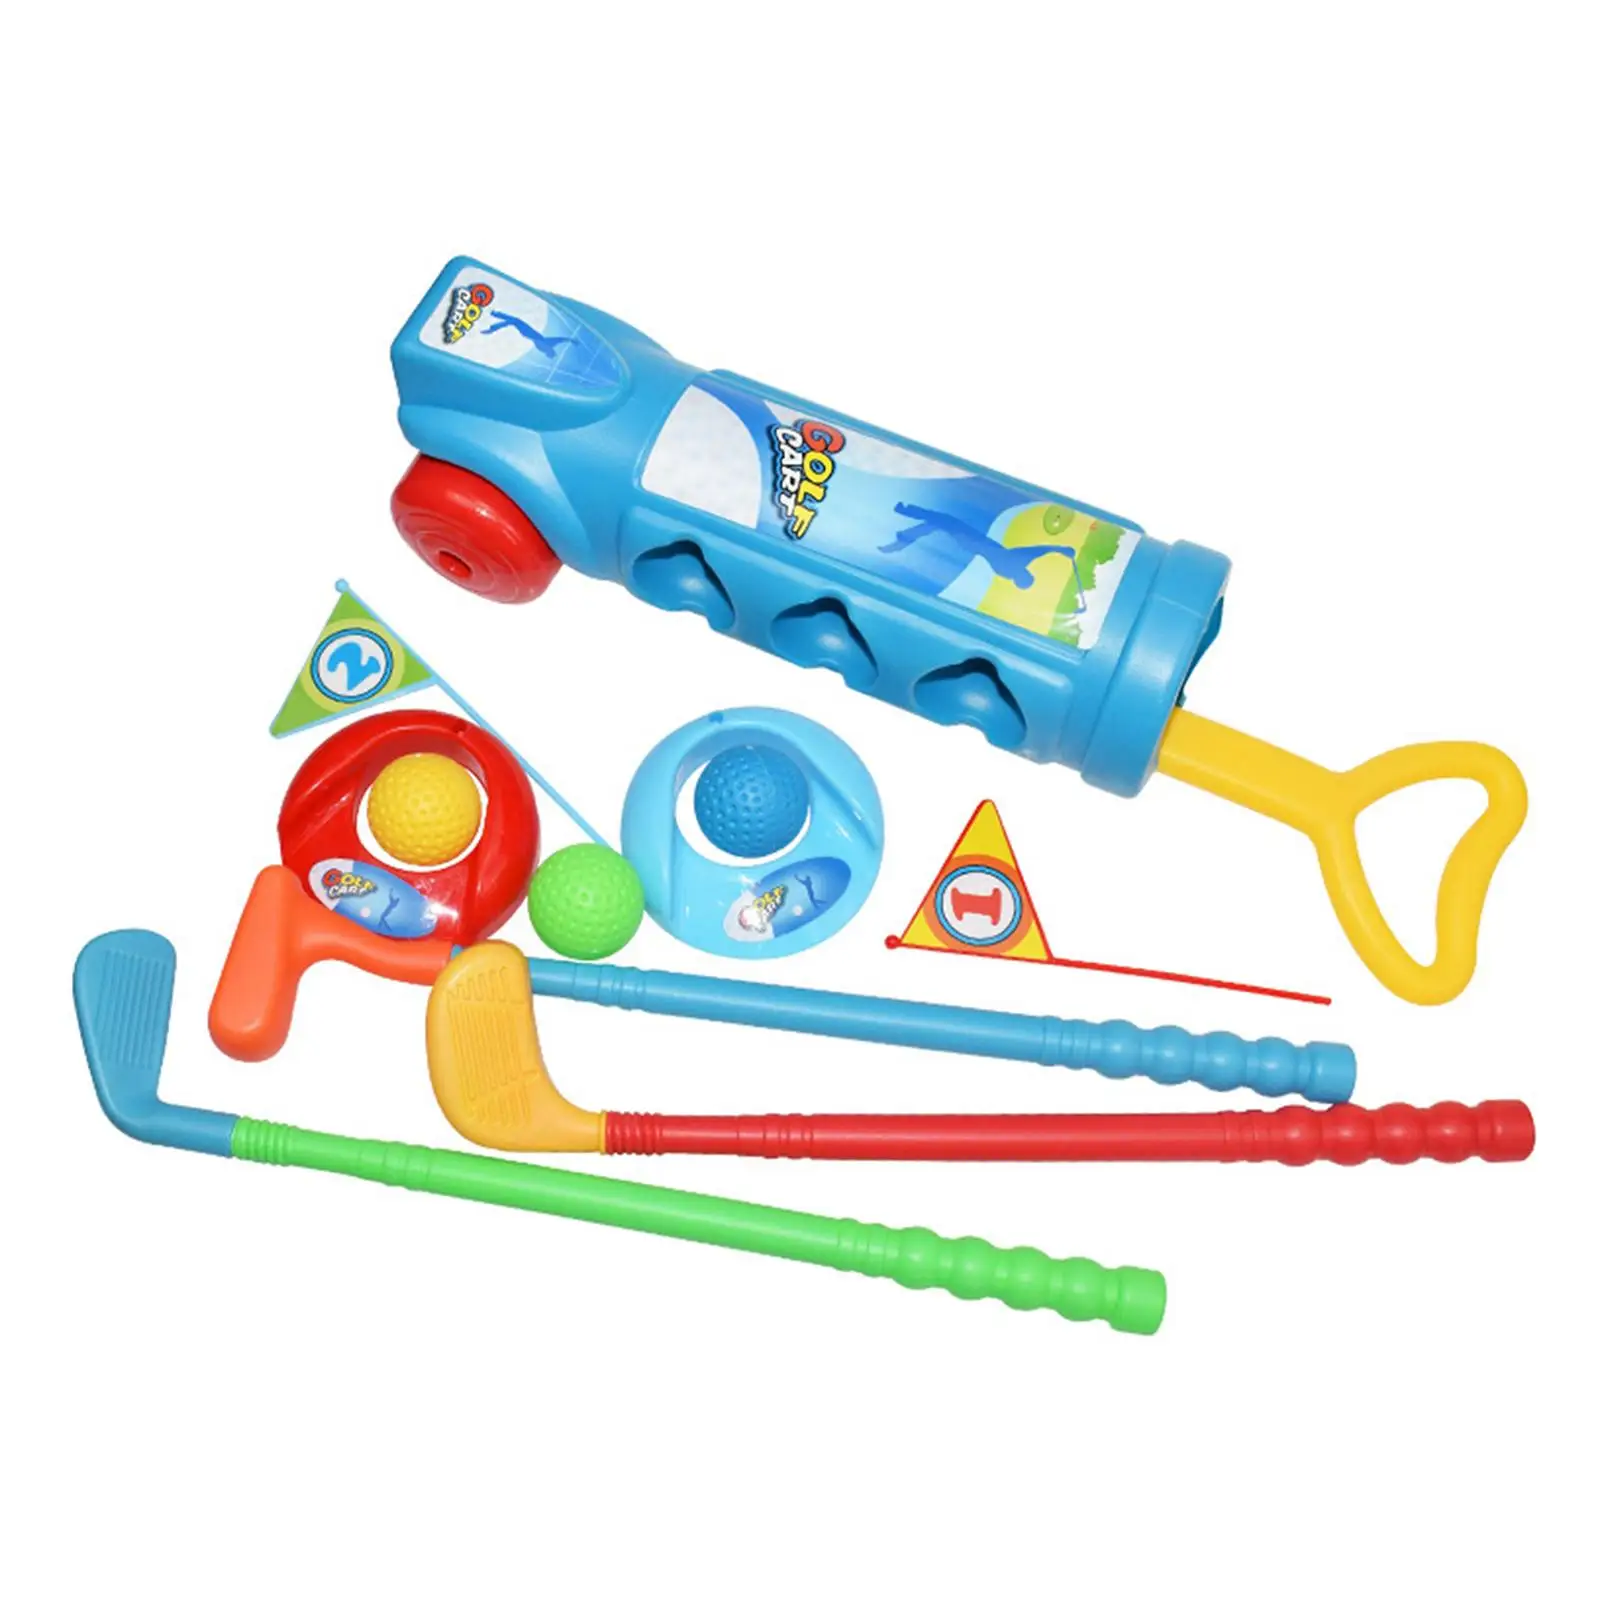 Kids Golf Clubs Set Exercise Toy with Golf Clubs Training Golf Toy for Birthday Gifts